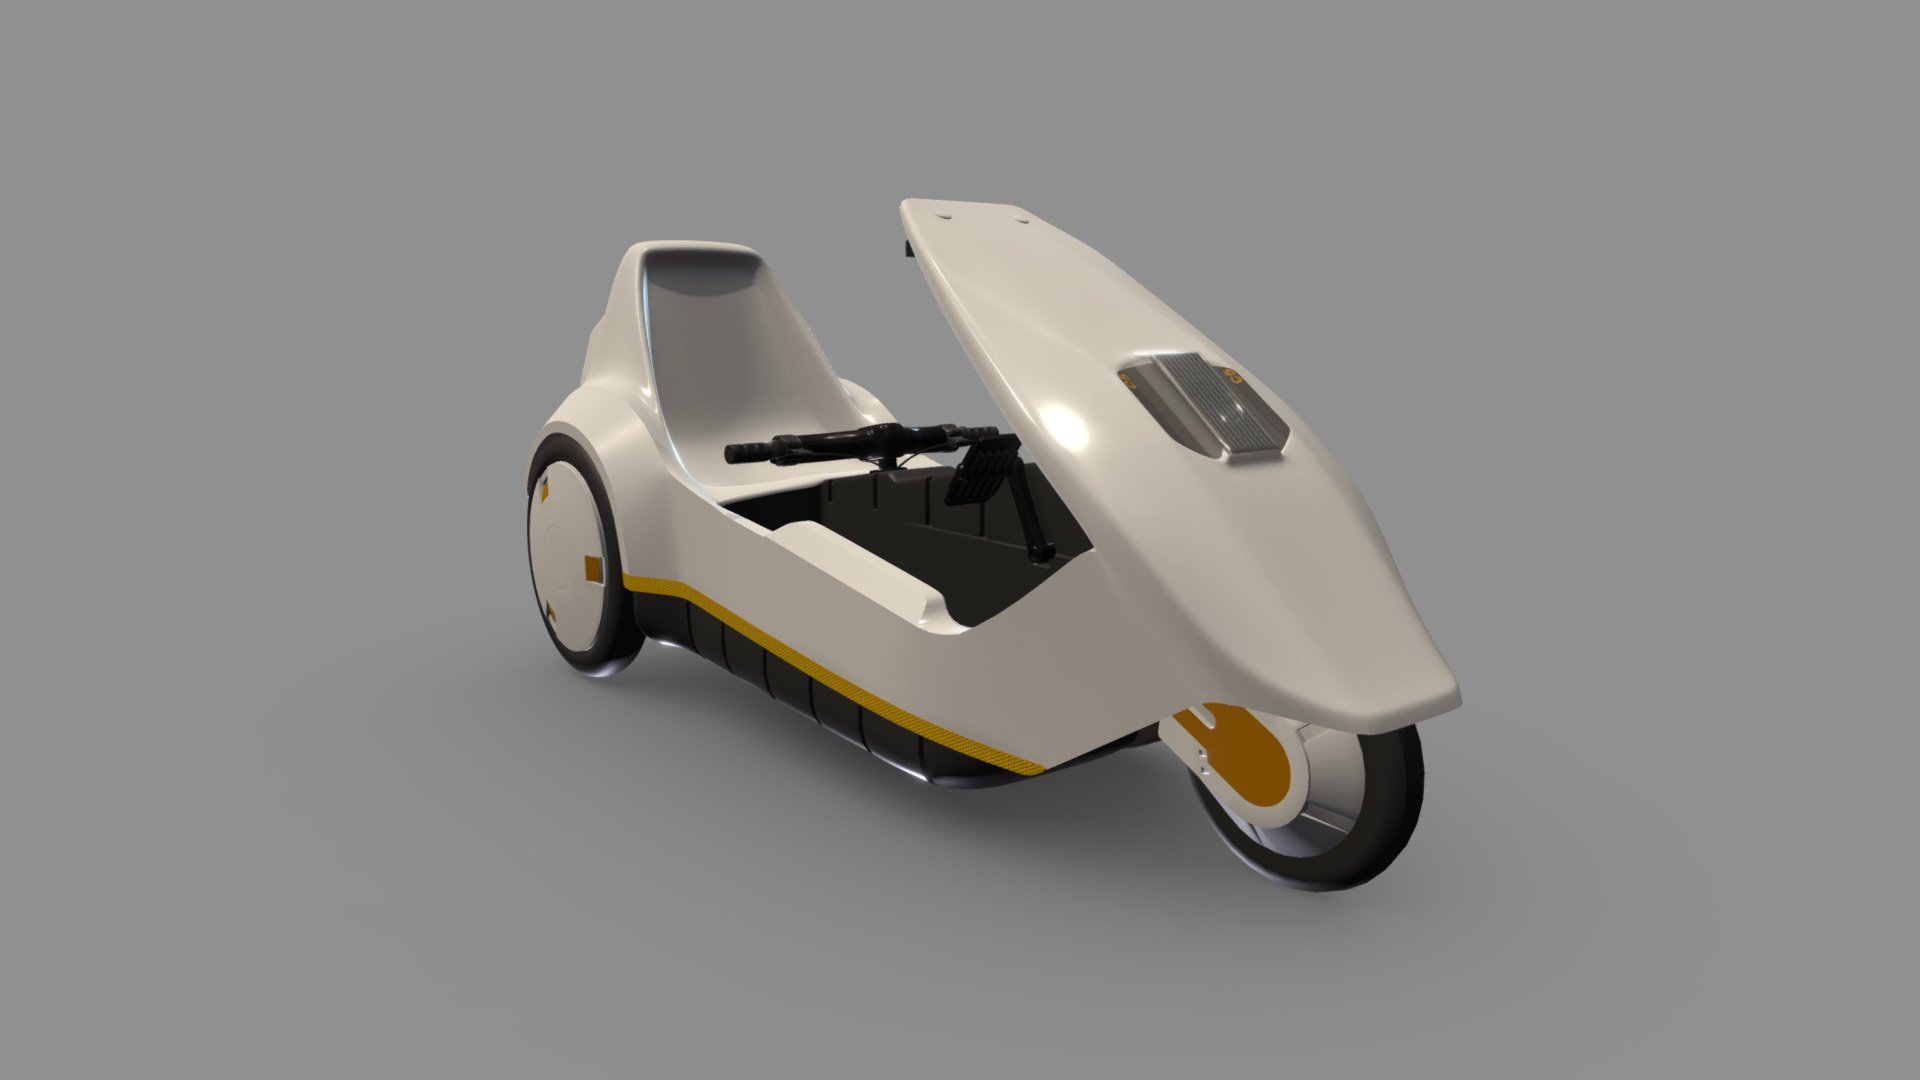 The Sinclair C5 is a 1985 small one-person battery electric recumbent tricycle invented by Sir Clive Sinclair (most known internationally as the creator of the ZX Spectrum in 1982).  It received a less than enthusiastic reception from the British media. Its sales prospects were blighted by poor reviews and safety concerns expressed by consumer and motoring organisations. The vehicle's limitations – a short range, a maximum speed of only 15 mph (24 km/h), a battery that ran down quickly and a lack of weatherproofing – made it impractical for most people's needs. The C5 became known as &ldquo;one of the great marketing bombs of postwar British industry